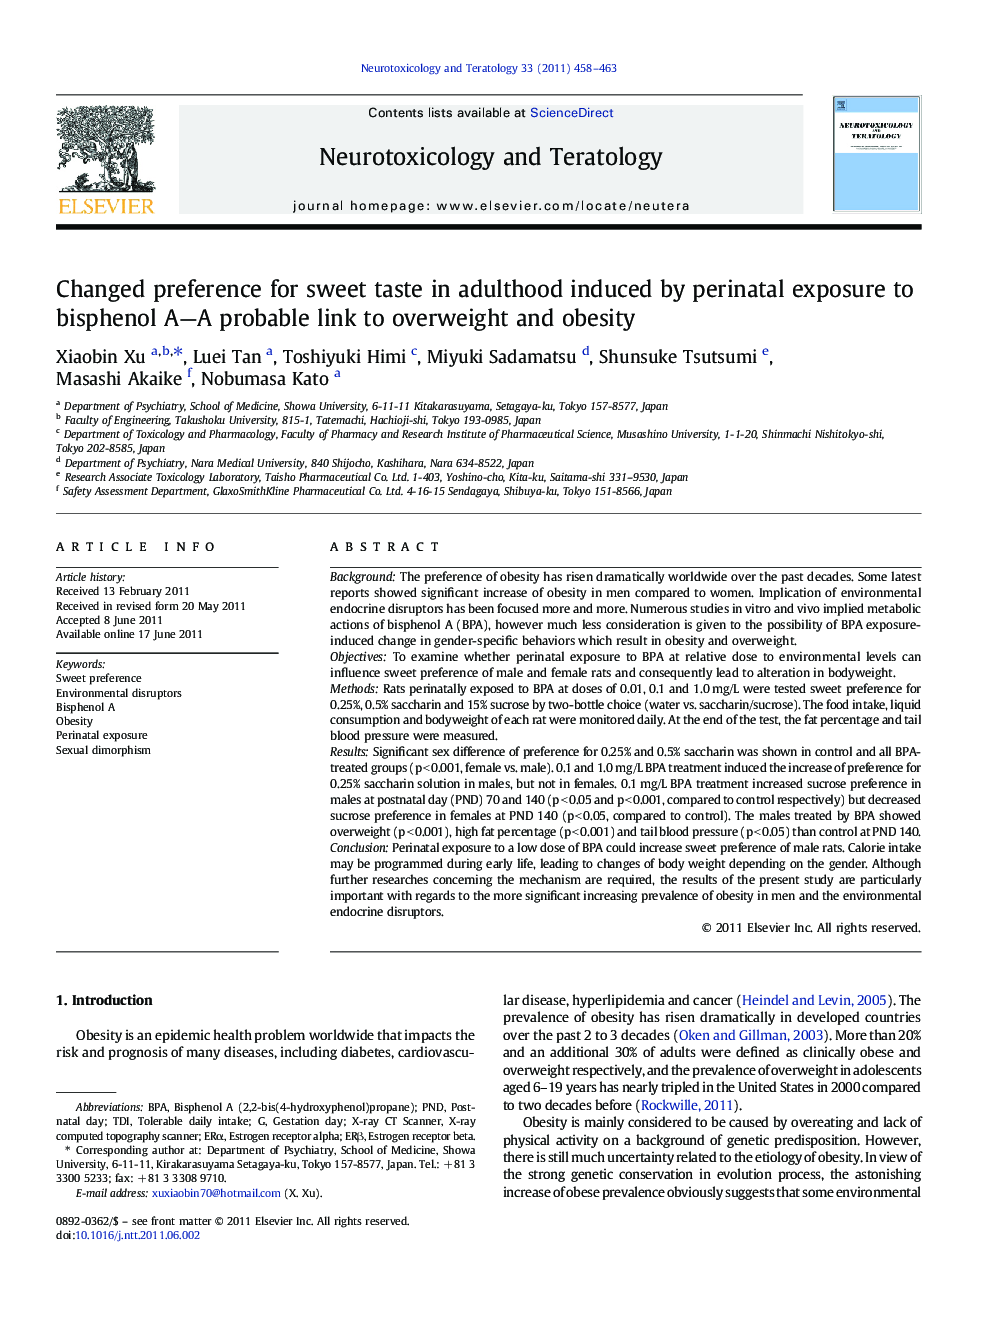 Changed preference for sweet taste in adulthood induced by perinatal exposure to bisphenol A—A probable link to overweight and obesity